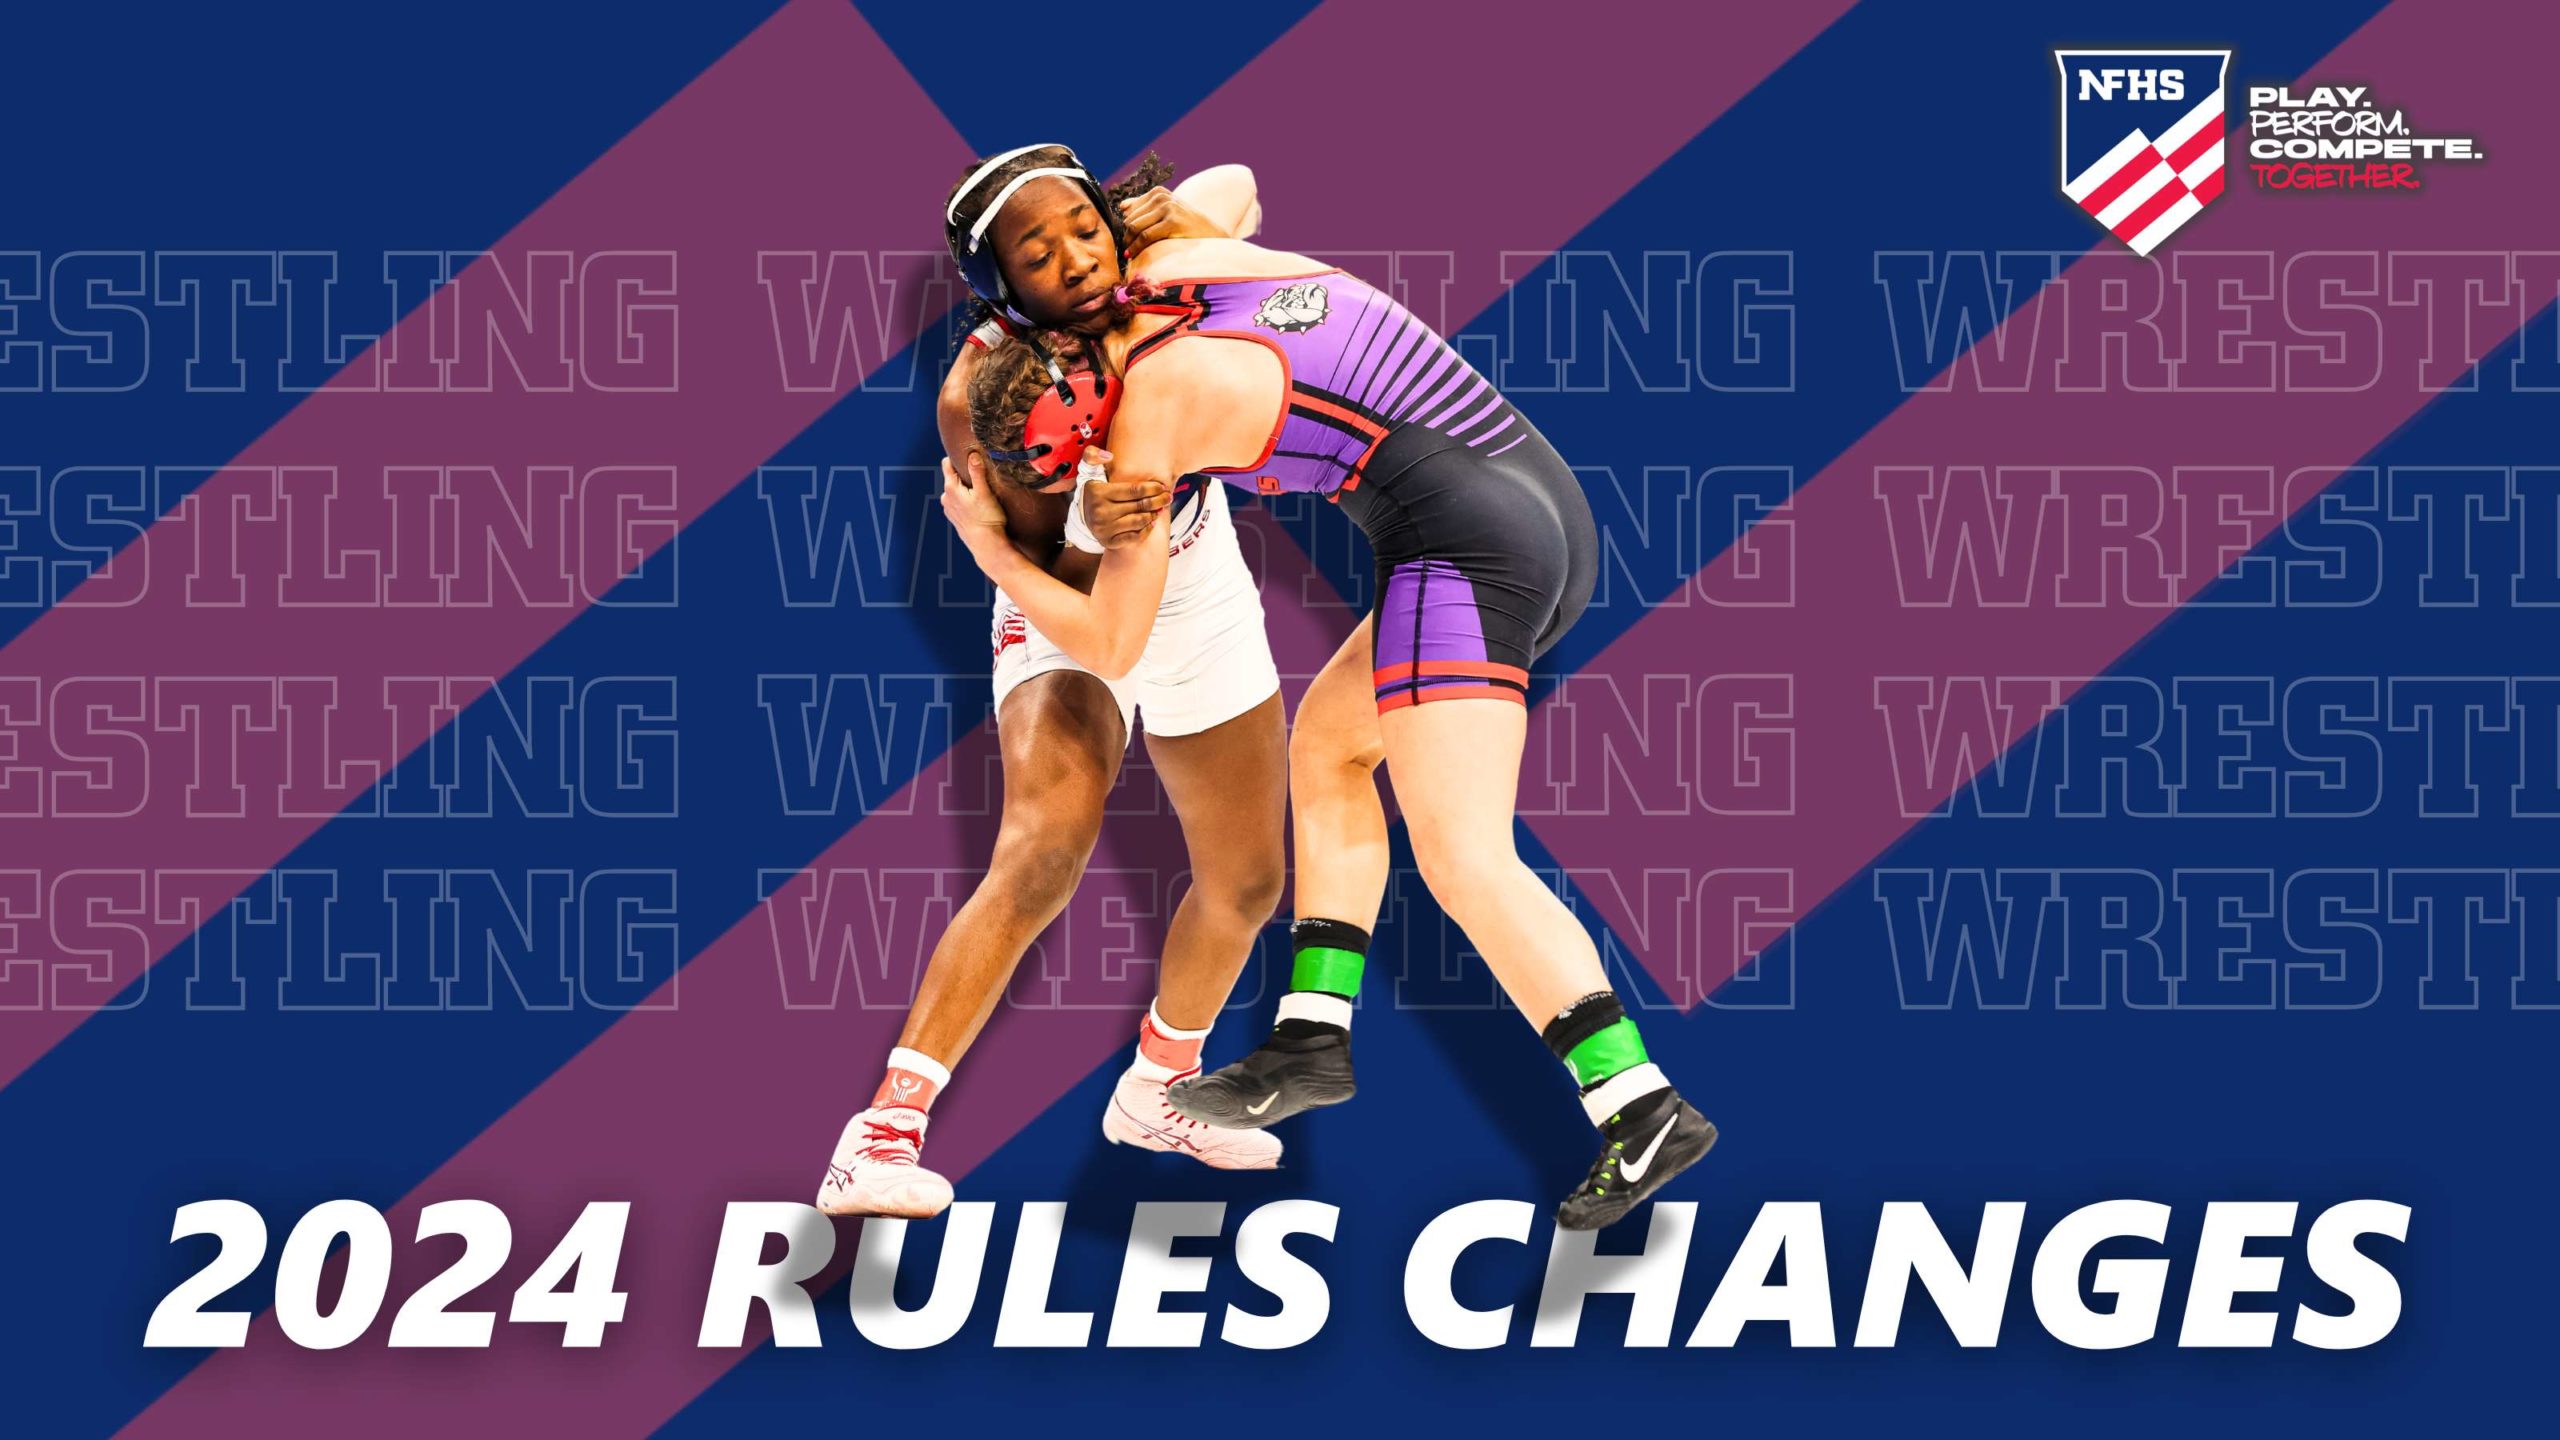 NFHS Rule Change: Participants Now Inbounds with One Point of Contact in High School Wrestling